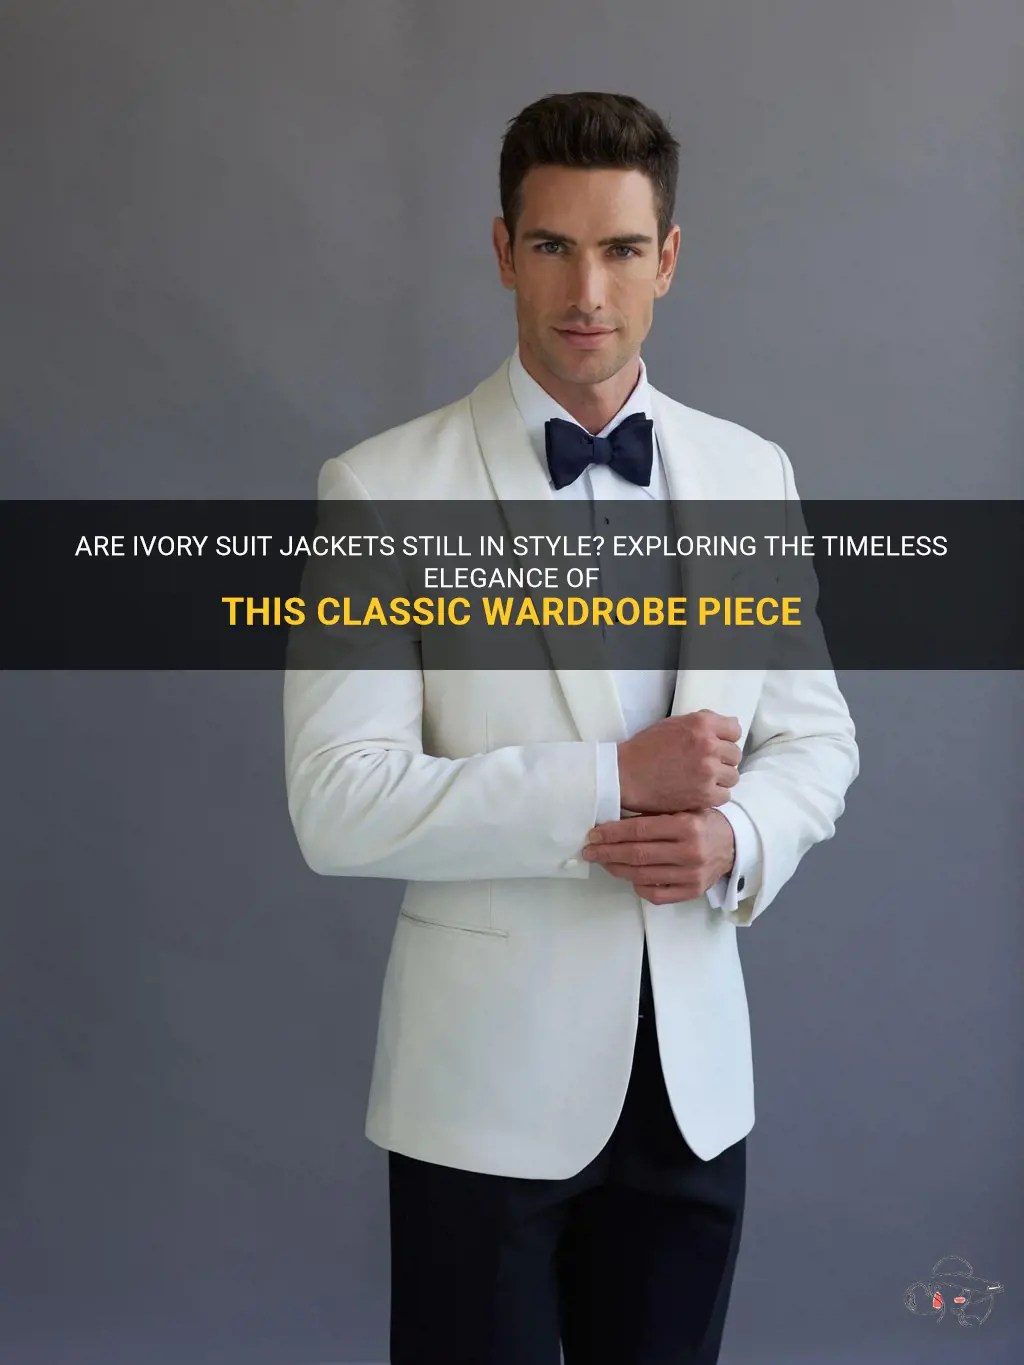 is an ivory suit jacket in style